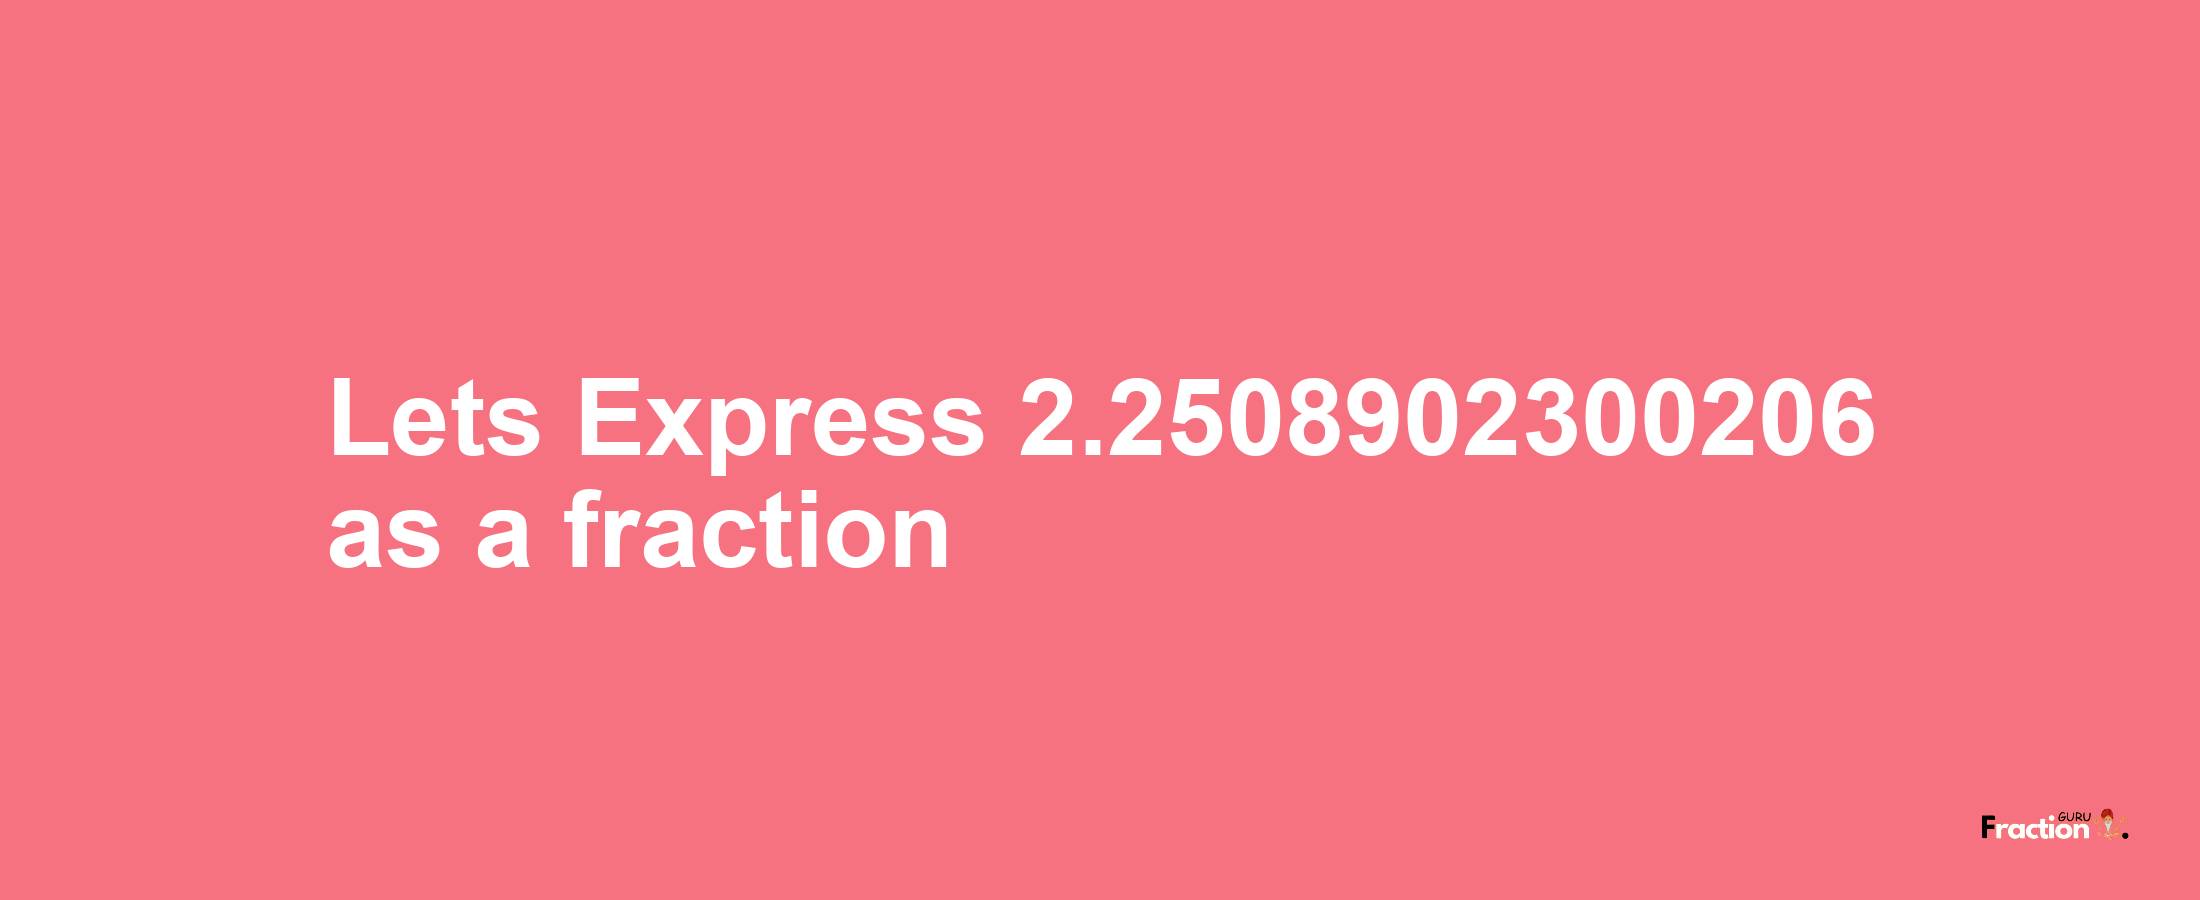 Lets Express 2.2508902300206 as afraction